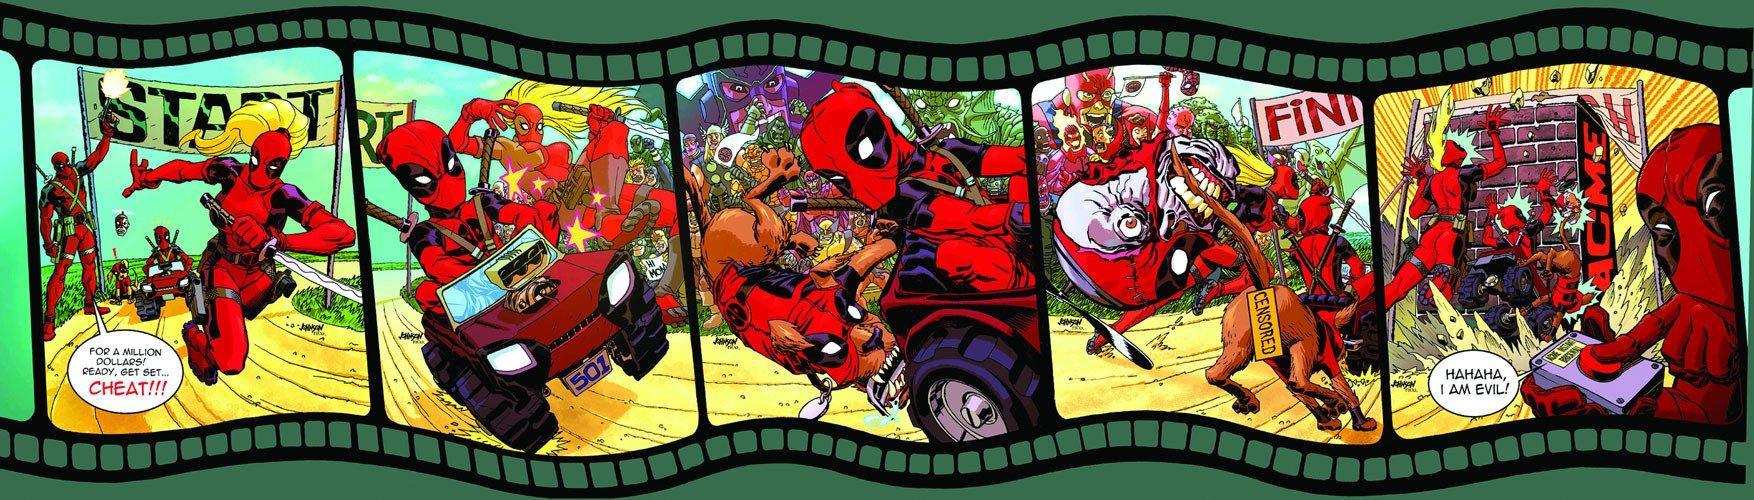 DEADPOOL CORPS BY DAVE JOHNSON POSTER - Kings Comics